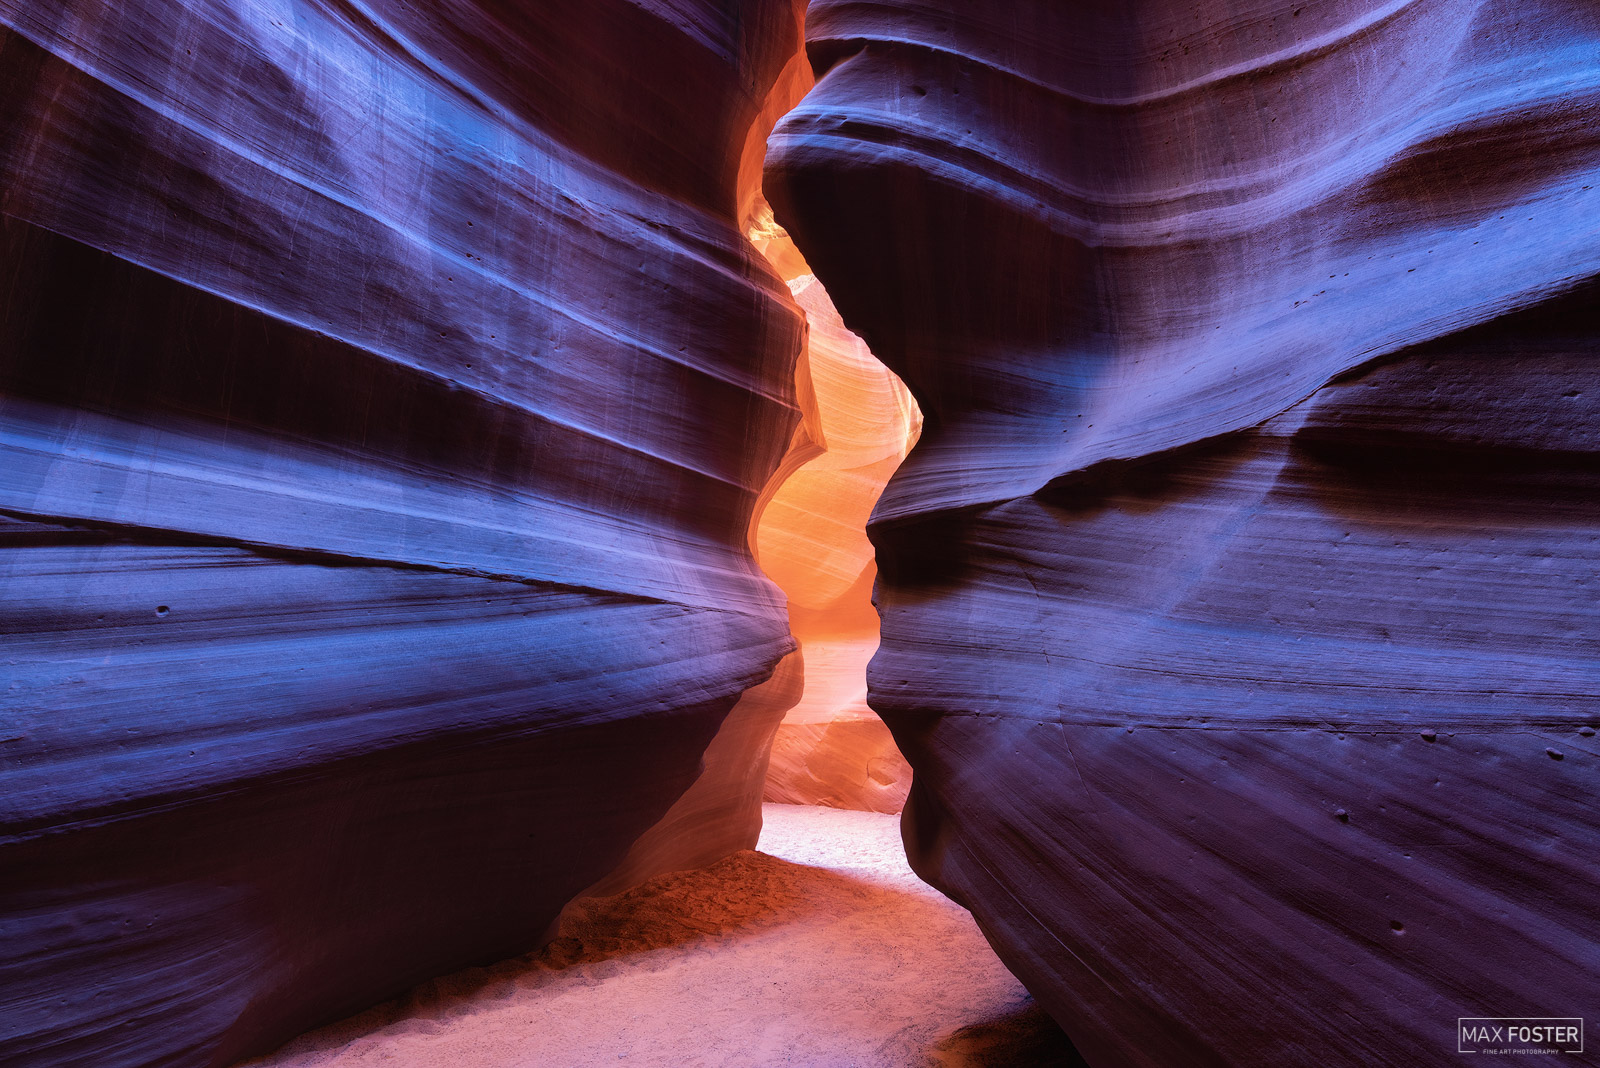 Breathe new life into your home with Candle In The Wind, Max Foster's limited edition photography print of Antelope Canyon in...